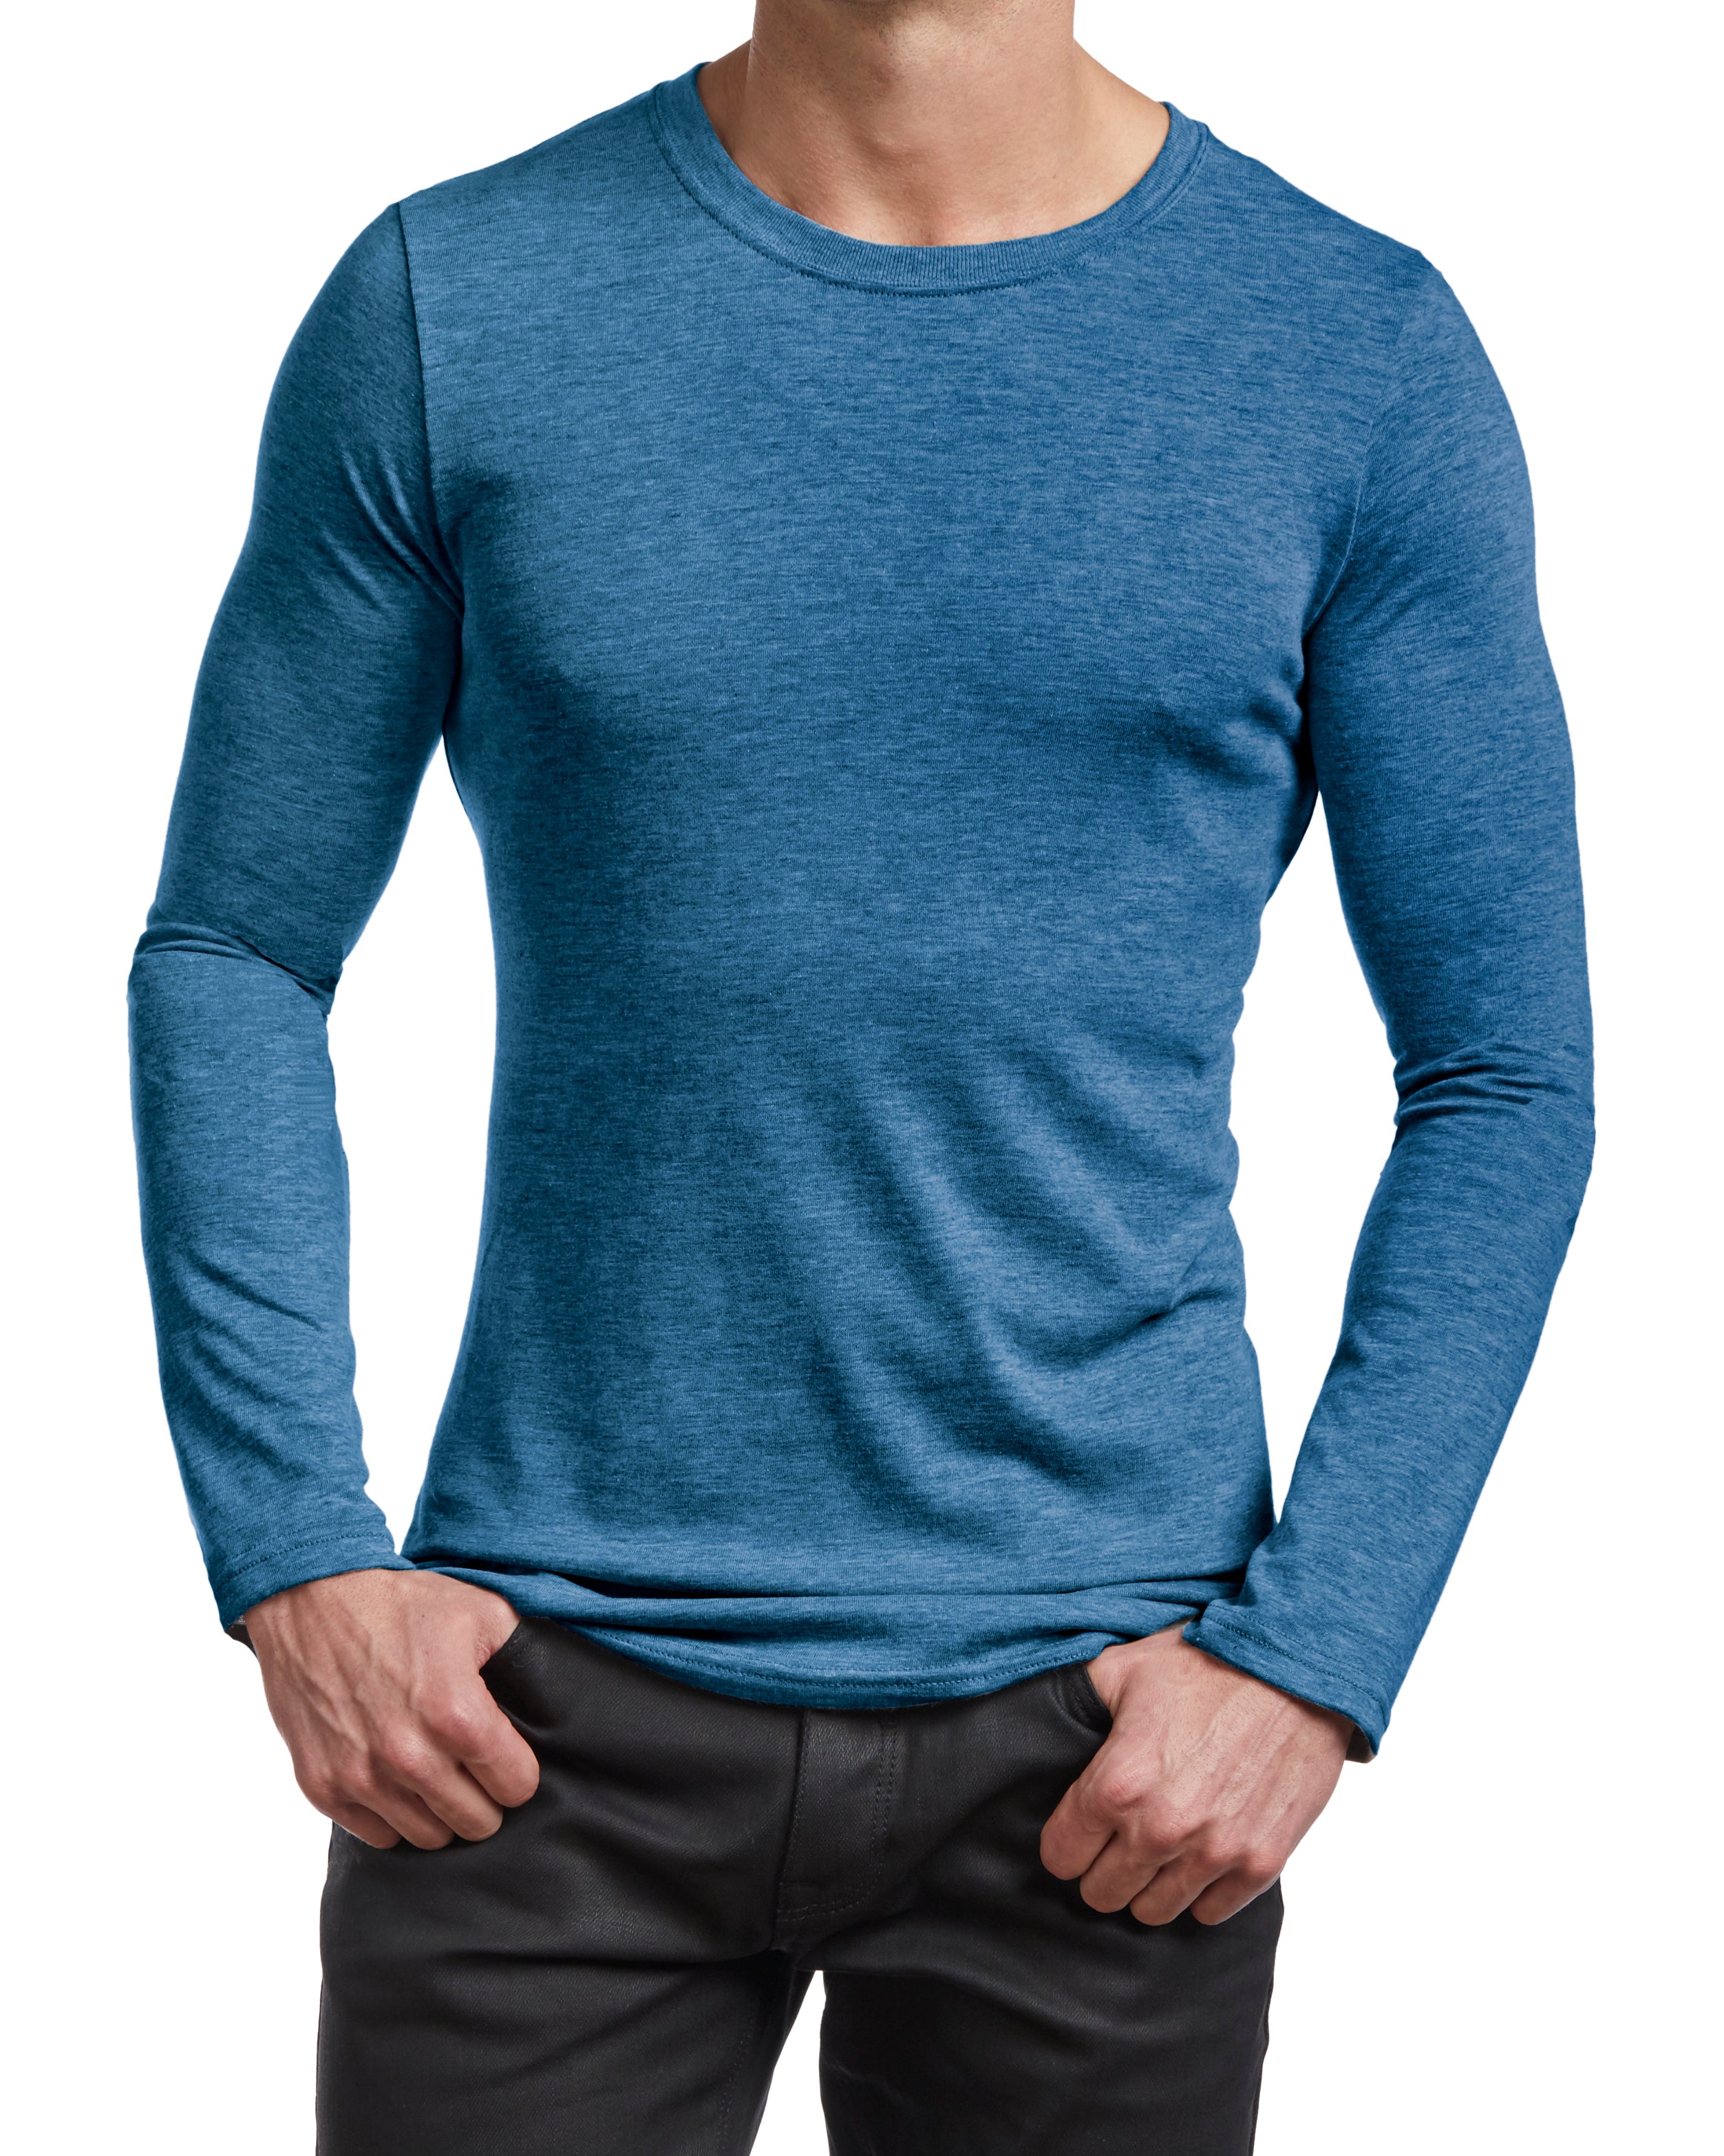 MIER Men's Long Sleeve Shirts Soft Stretch Combed Cotton Tees Crew Neck  Classic Fashion Casual T-Shirt, Tagless